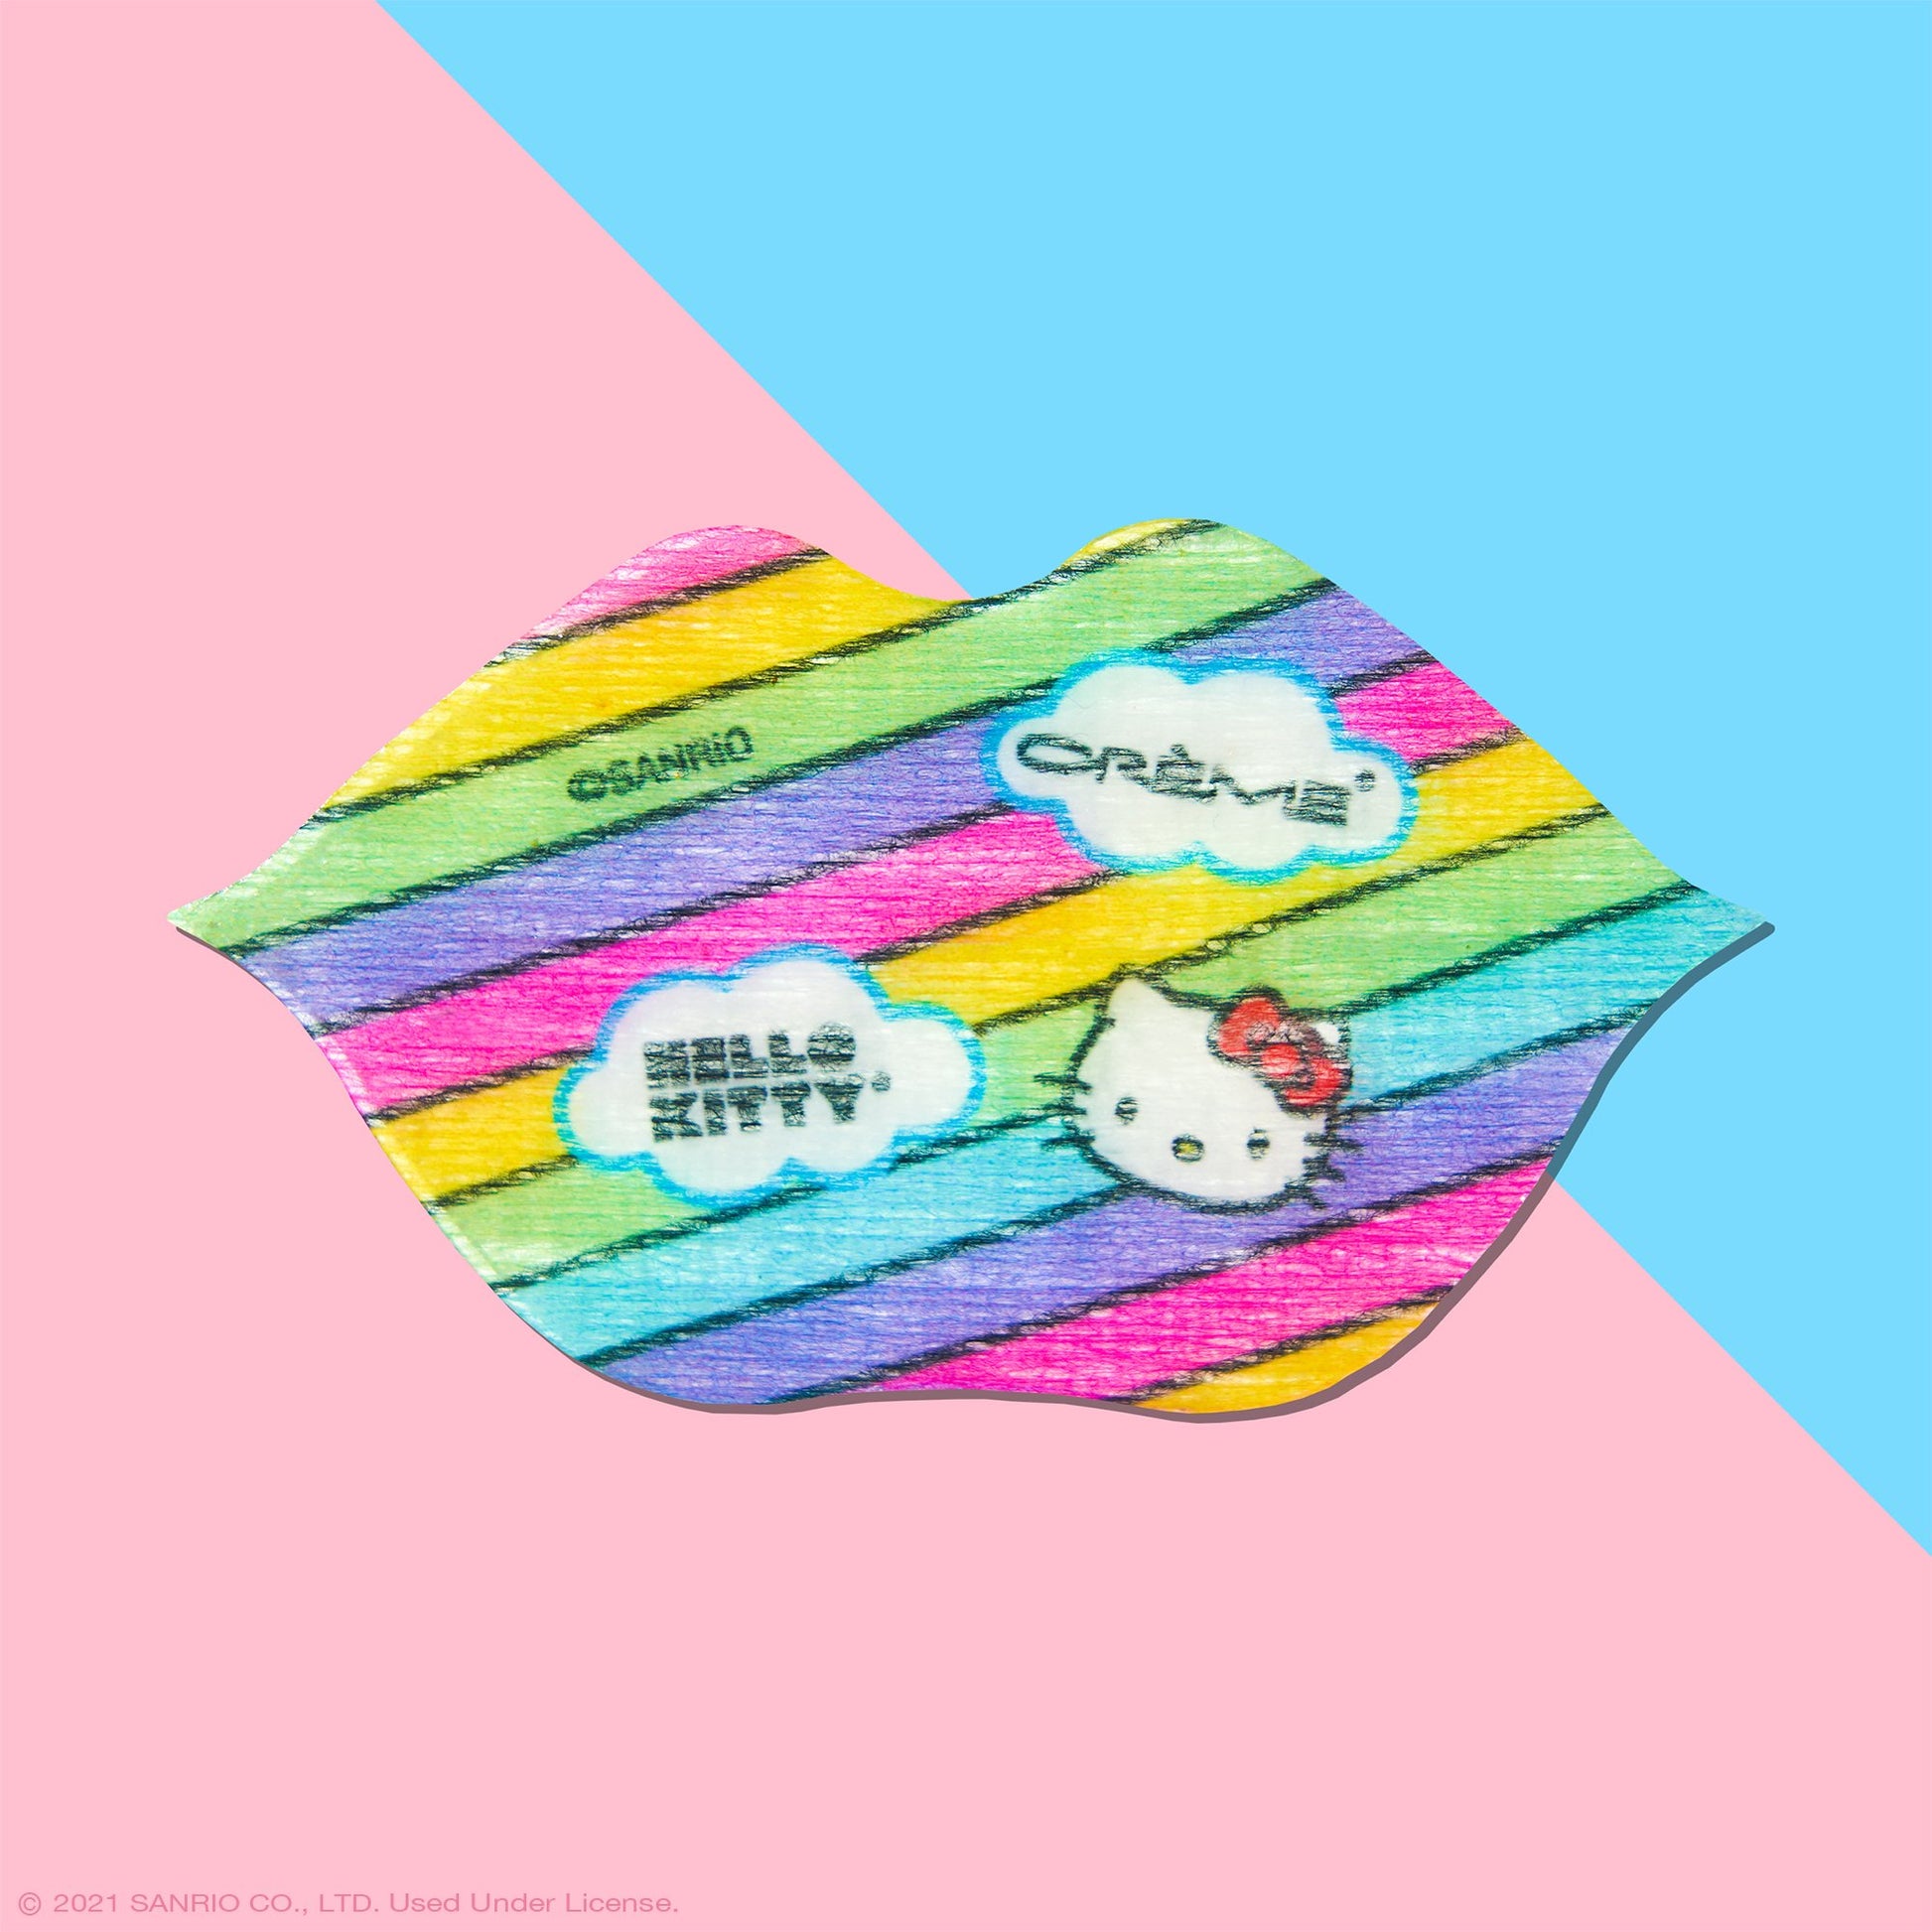 Hello Kitty Hydrogel Lip Patch | Strawberry Flavored Lip Patches The Crème Shop x Sanrio 